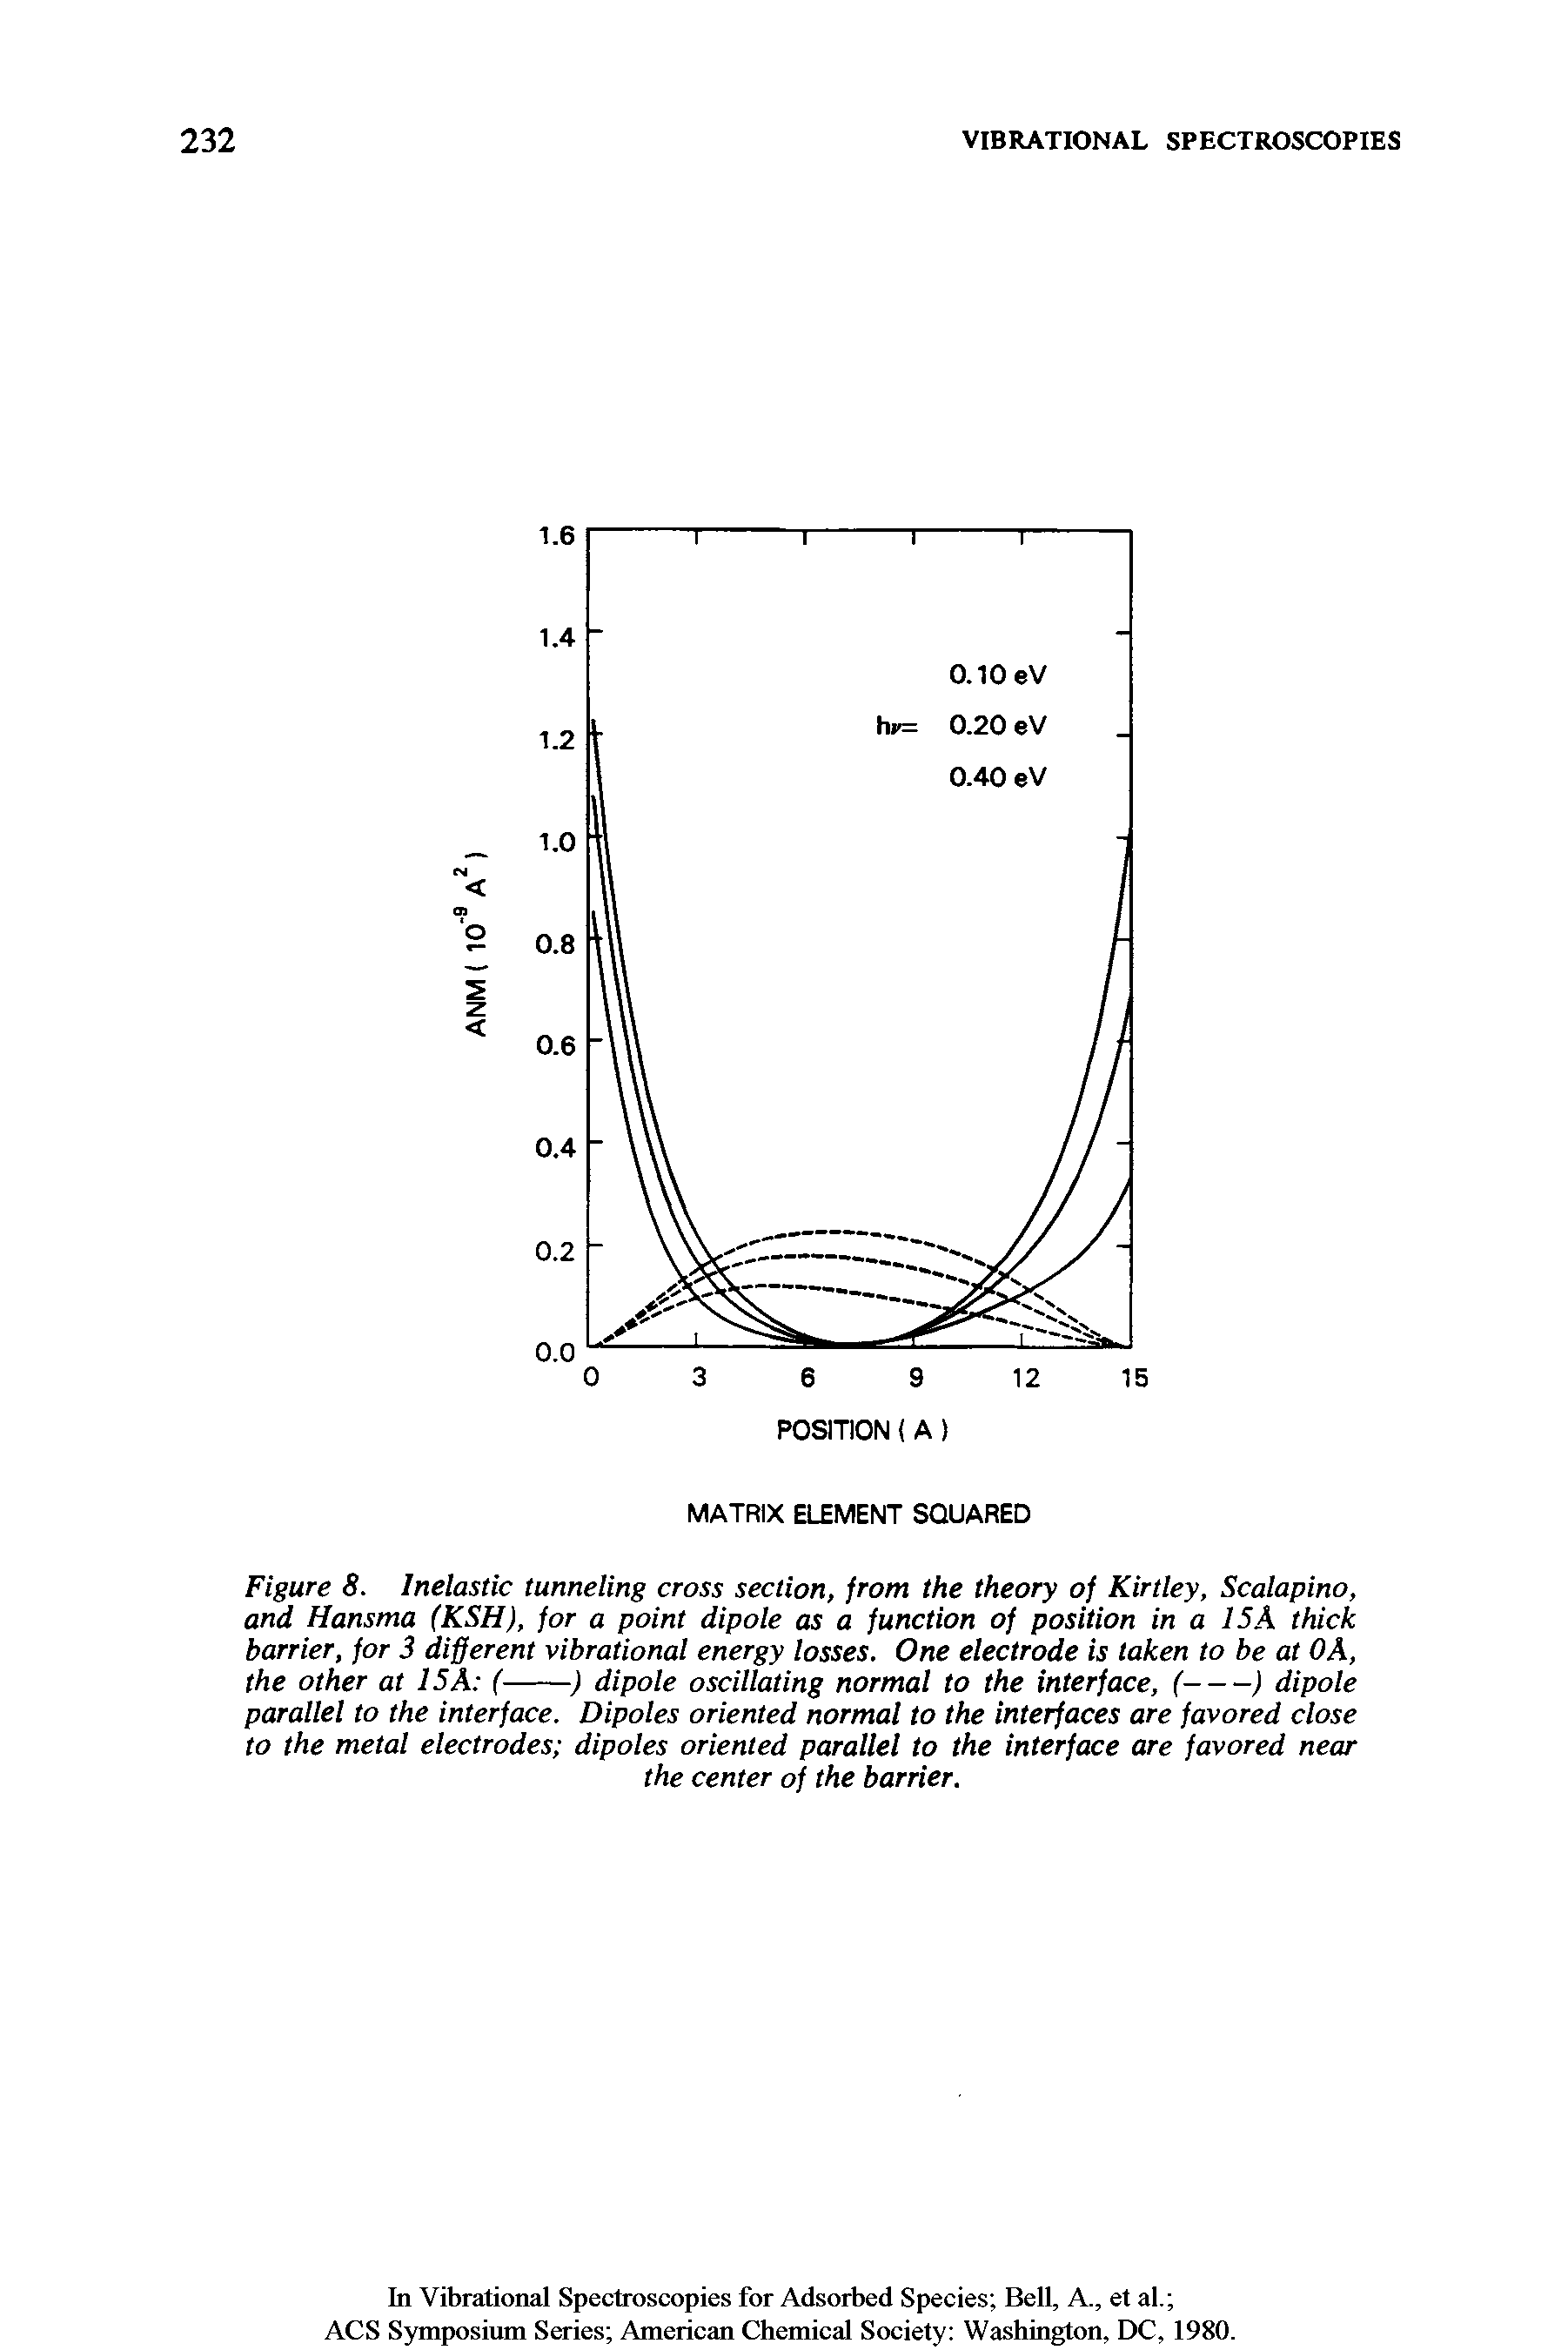 Figure 8. Inelastic tunneling cross section, from the theory of Kirtley, Scalapino, and Hansma (KSH), for a point dipole as a function of position in a ISA thick barrier, for 3 different vibrational energy losses. One electrode is taken to be at OA,...